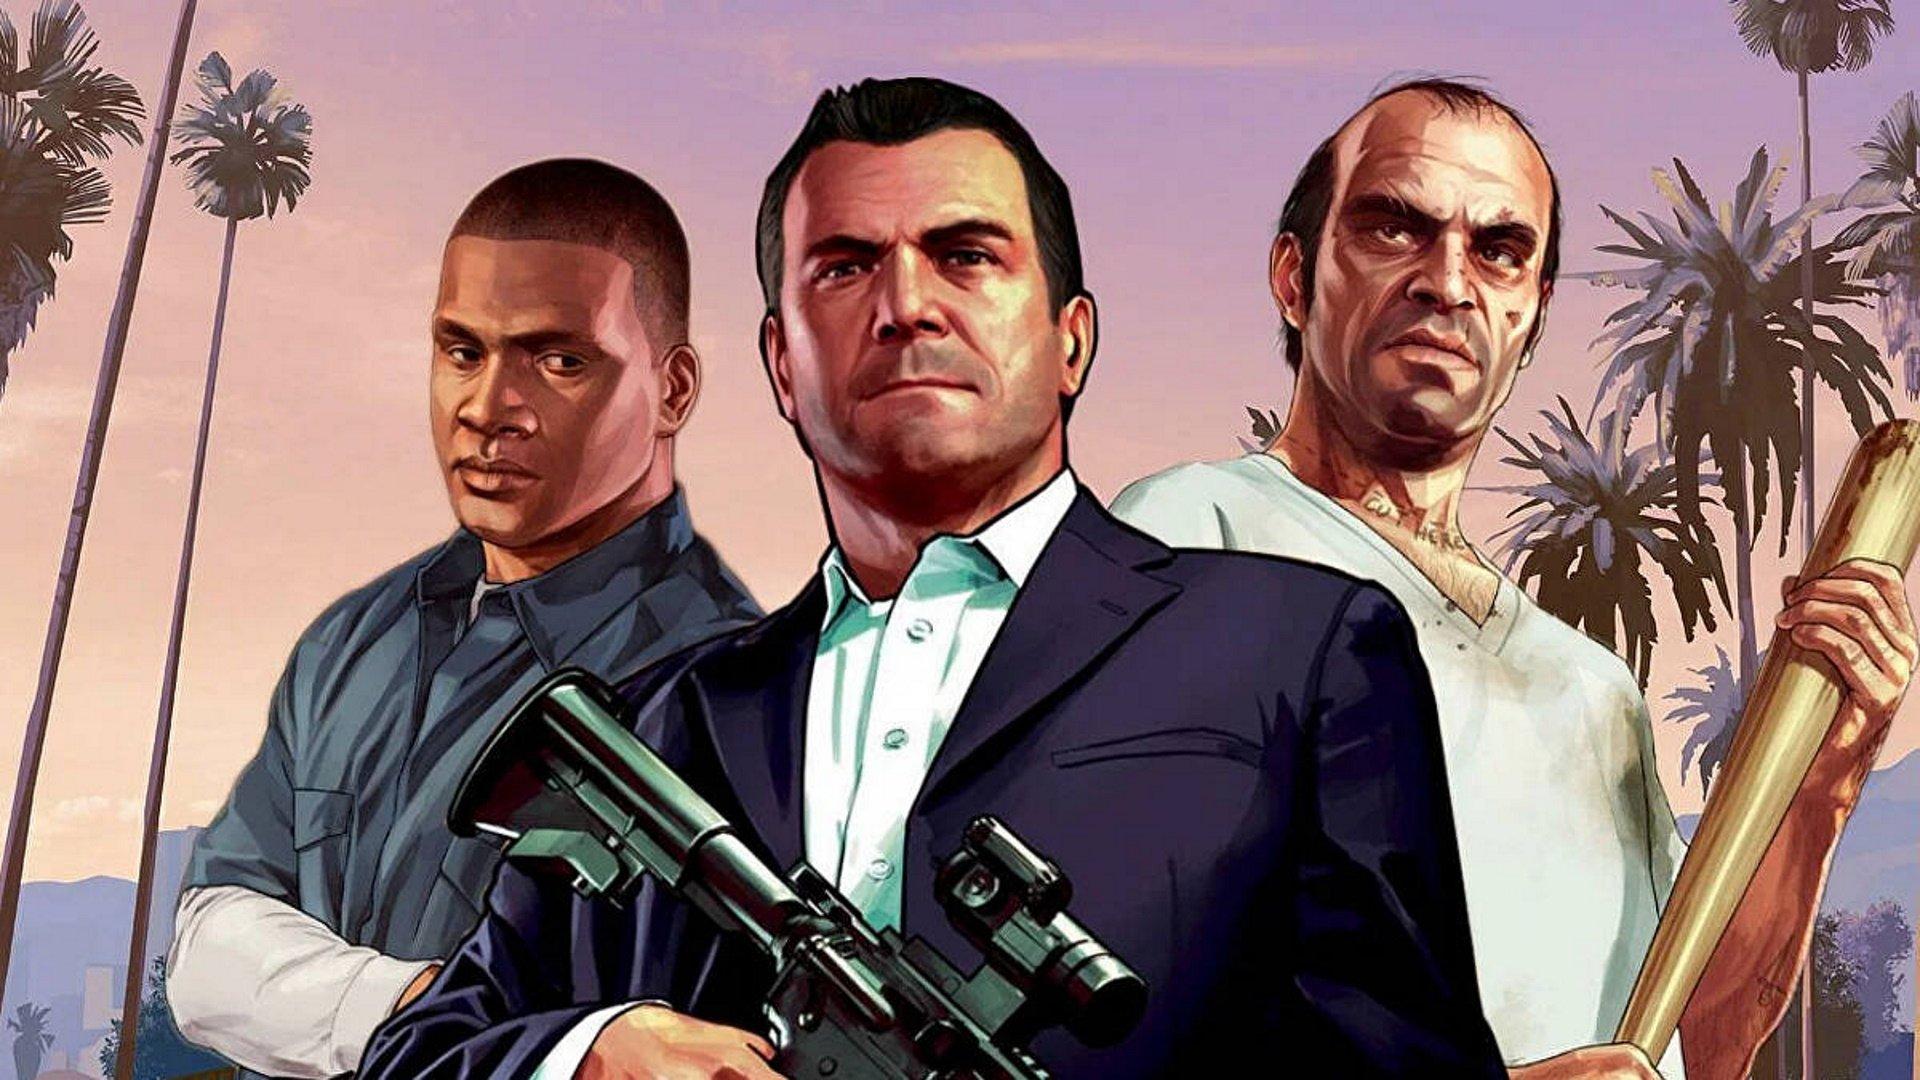 Gta 5 style or not фото 6